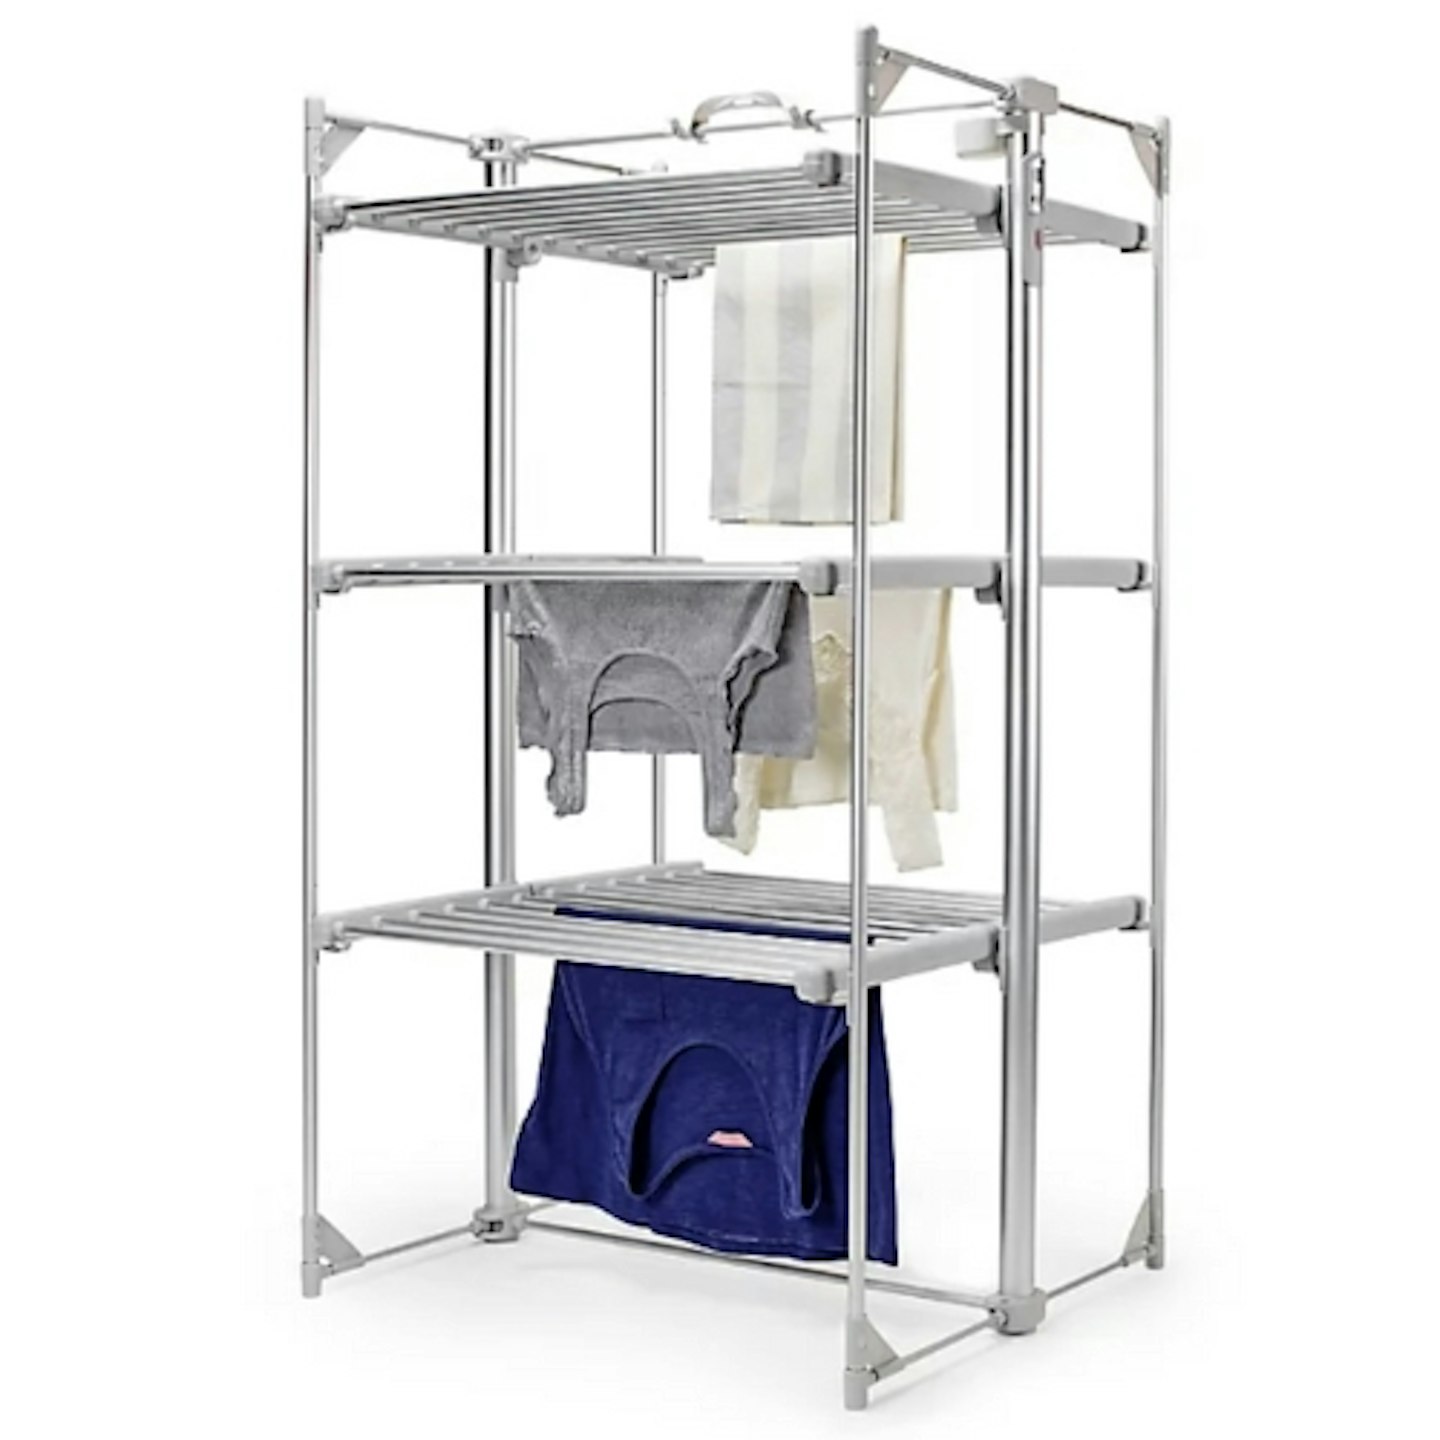 Dry Soon, Deluxe 3-Tier Heated Airer